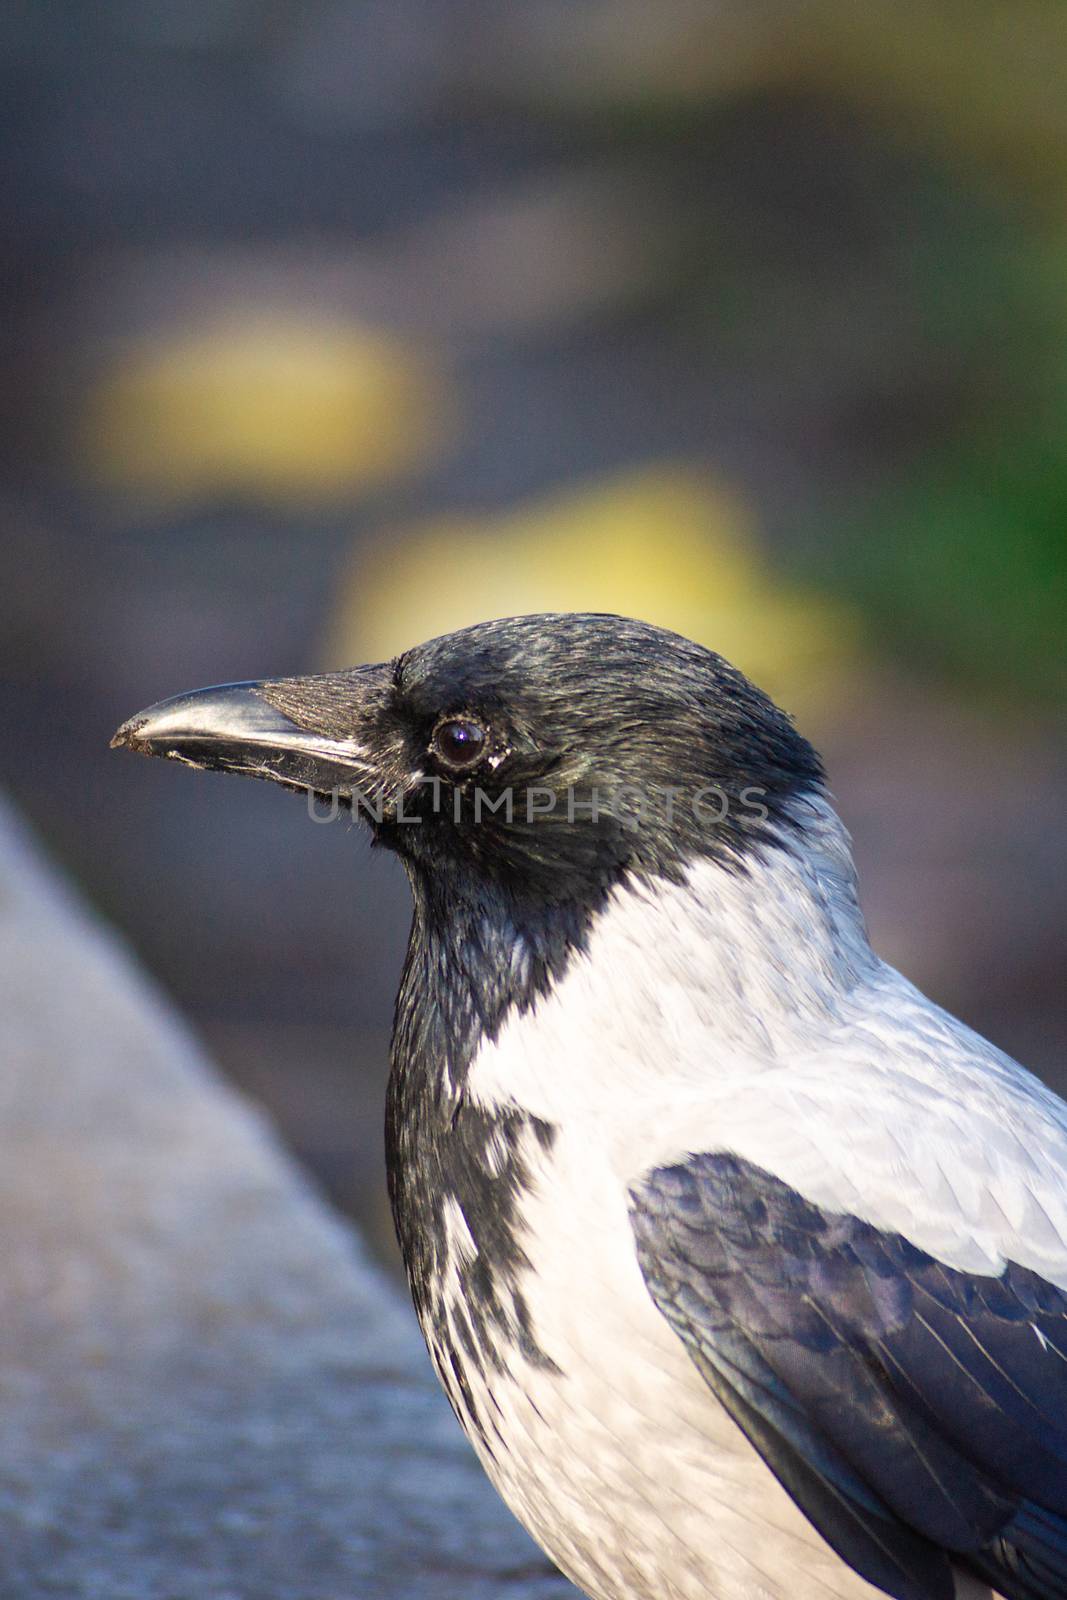 The city crow with black anf gray feathers on stone border with blurred background. by alexsdriver